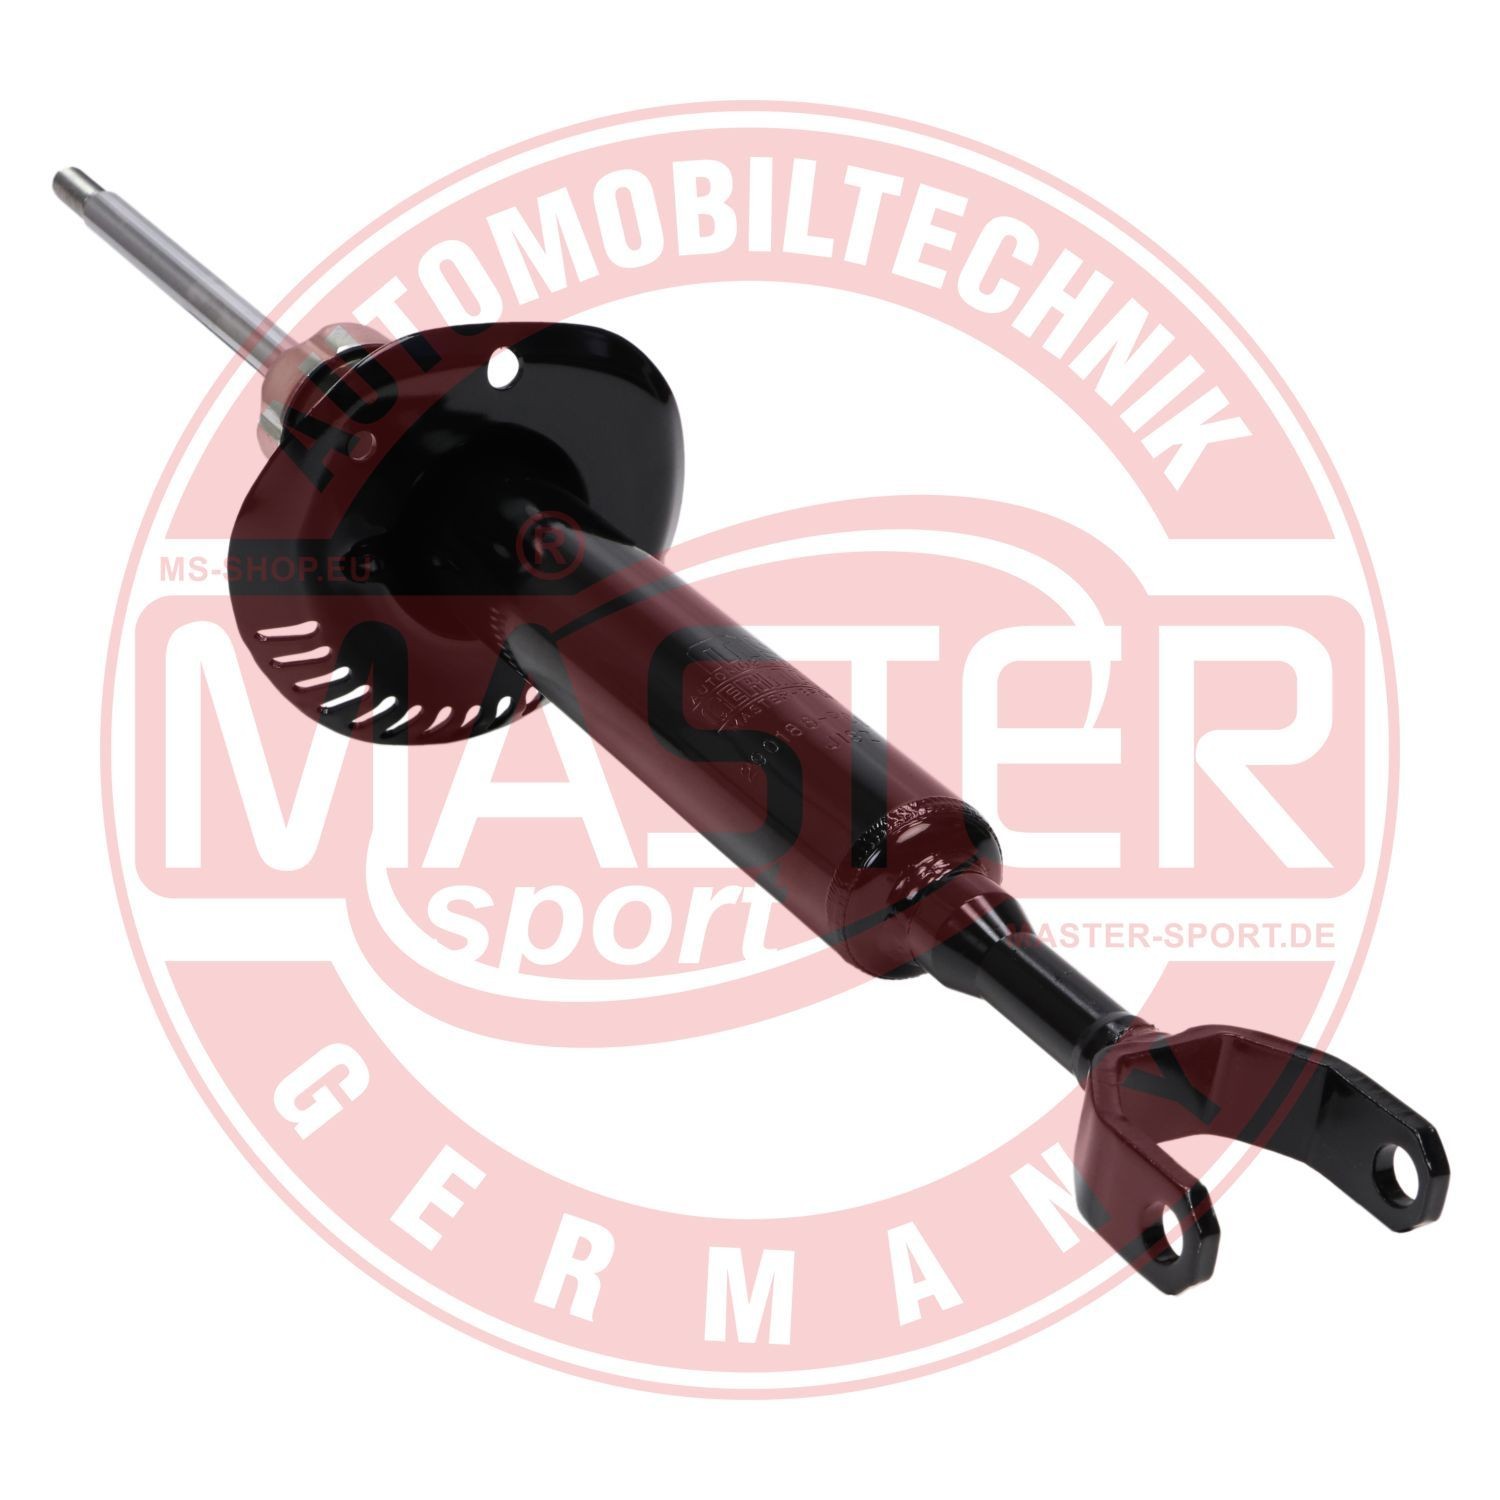 290186PCSMS Suspension dampers MASTER-SPORT AB162901861 review and test